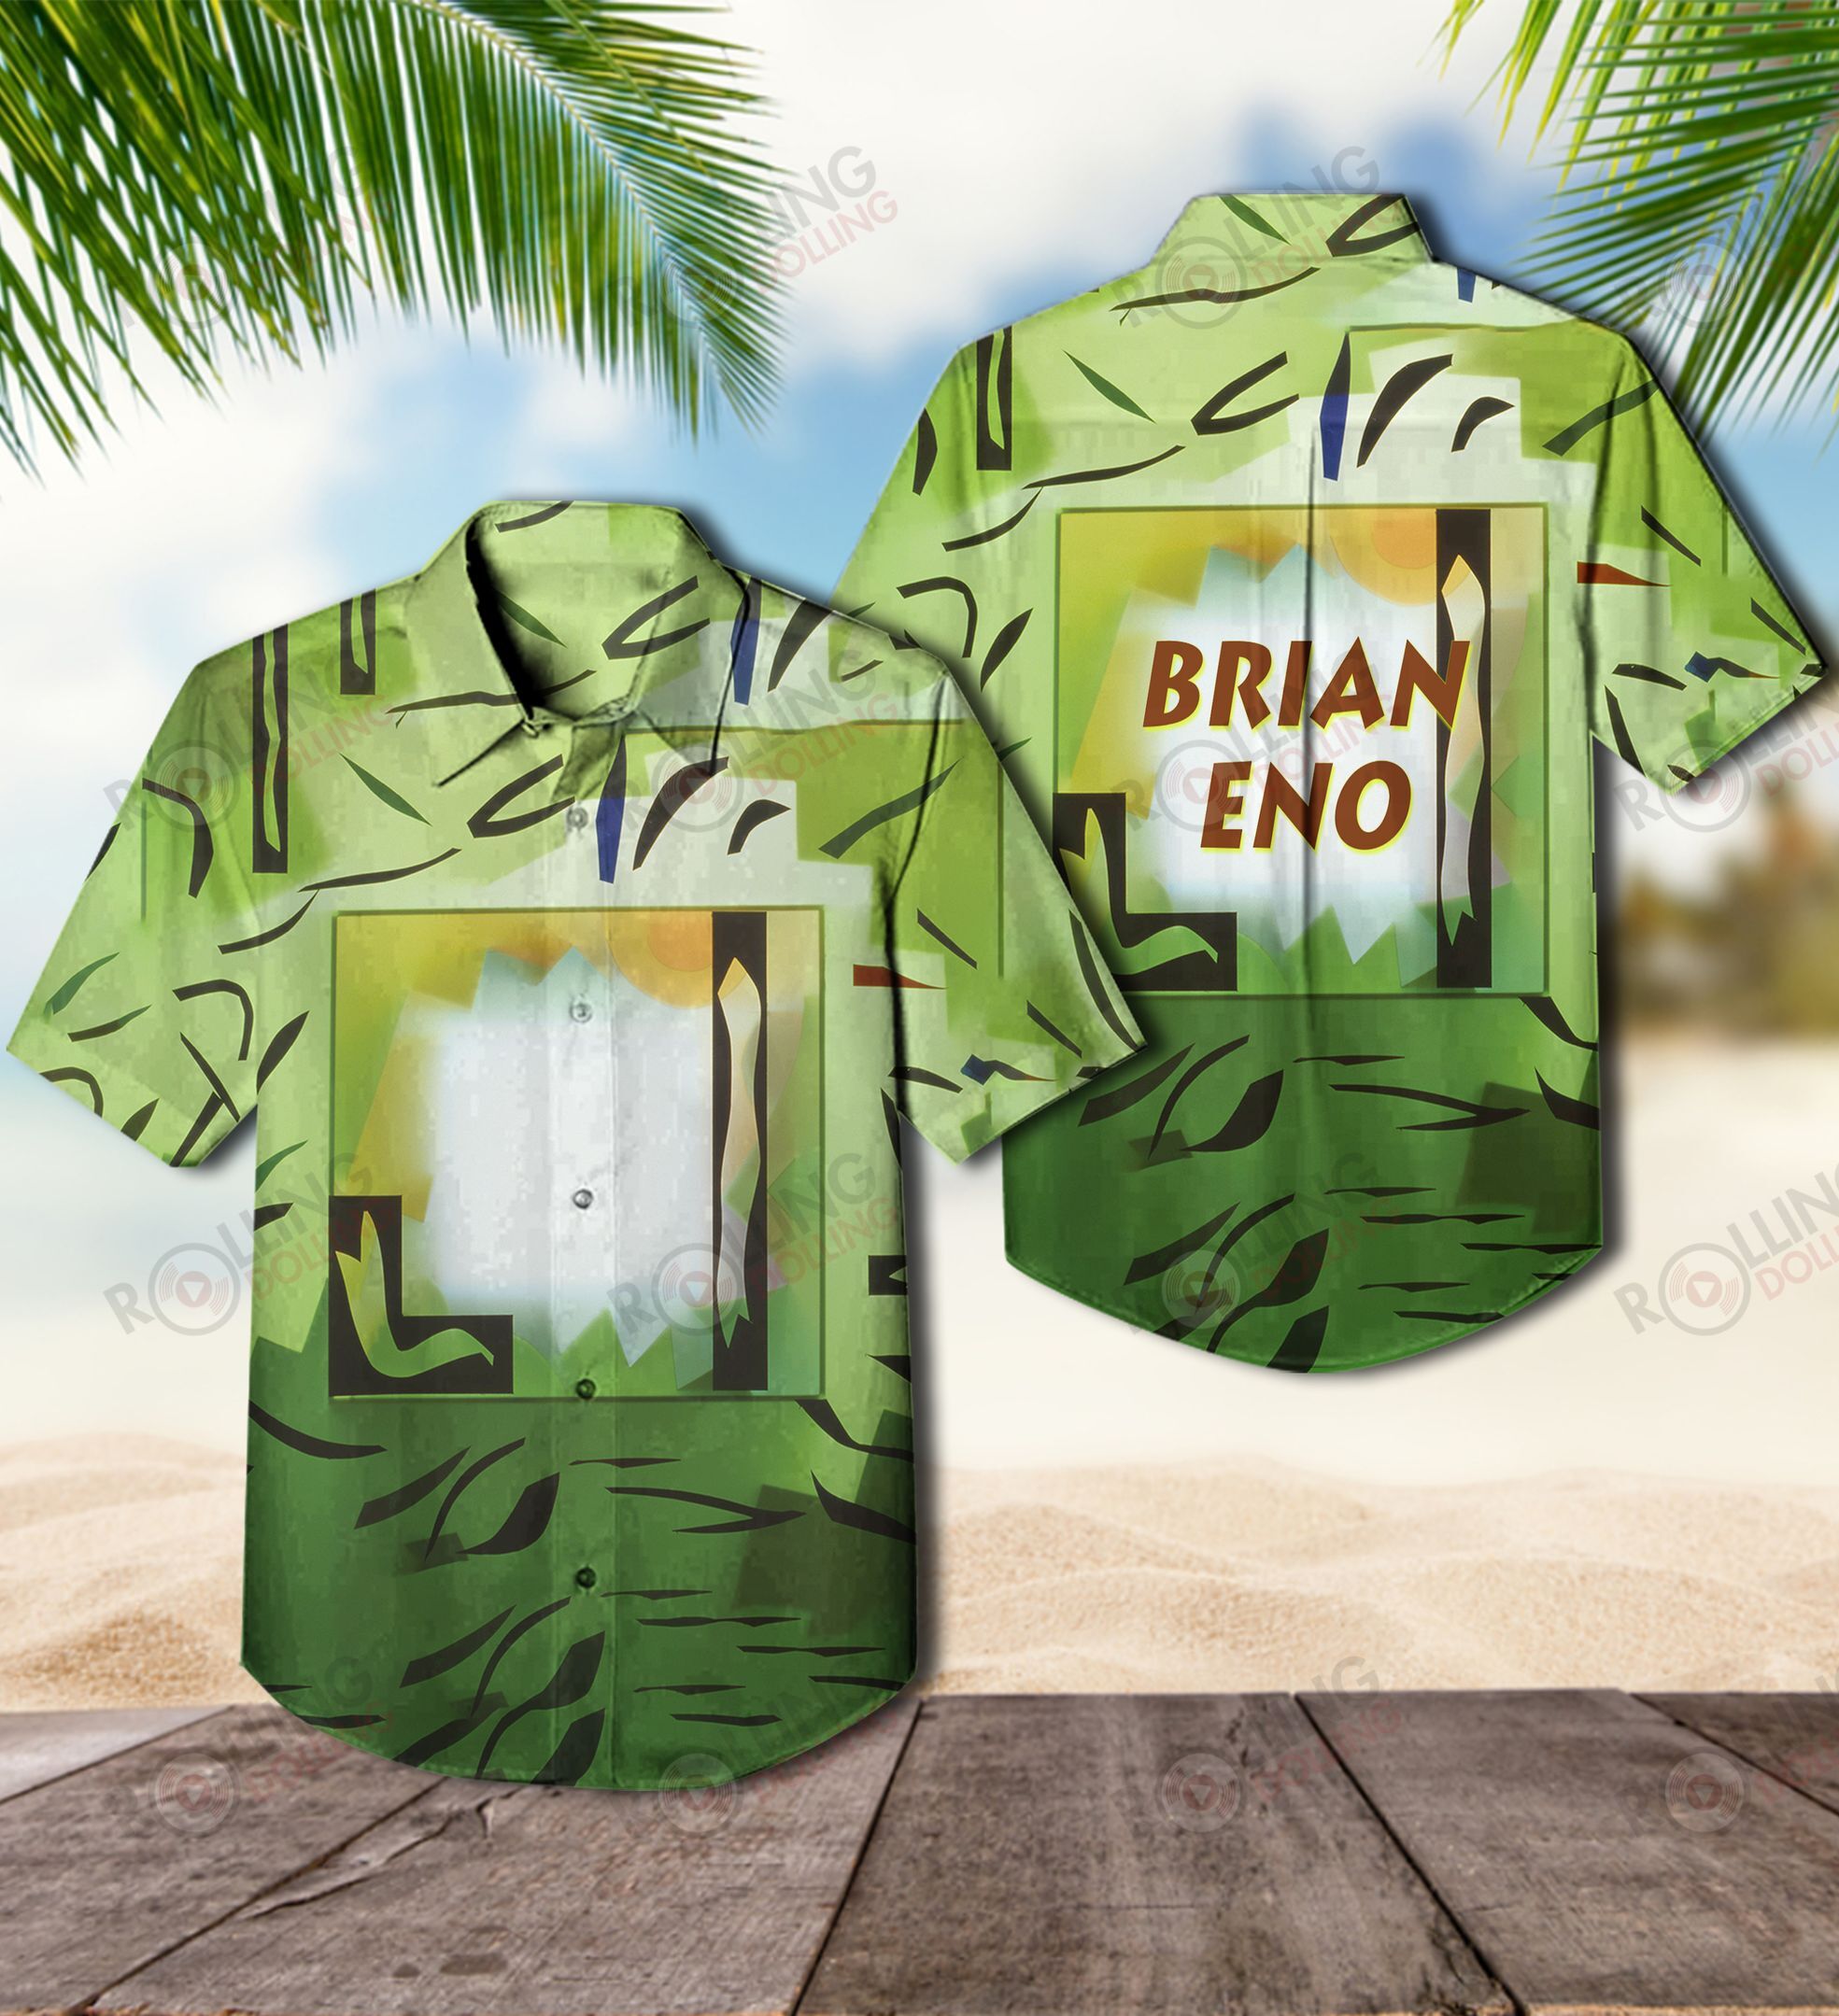 We have compiled a list of some of the best Hawaiian shirt that are available 63